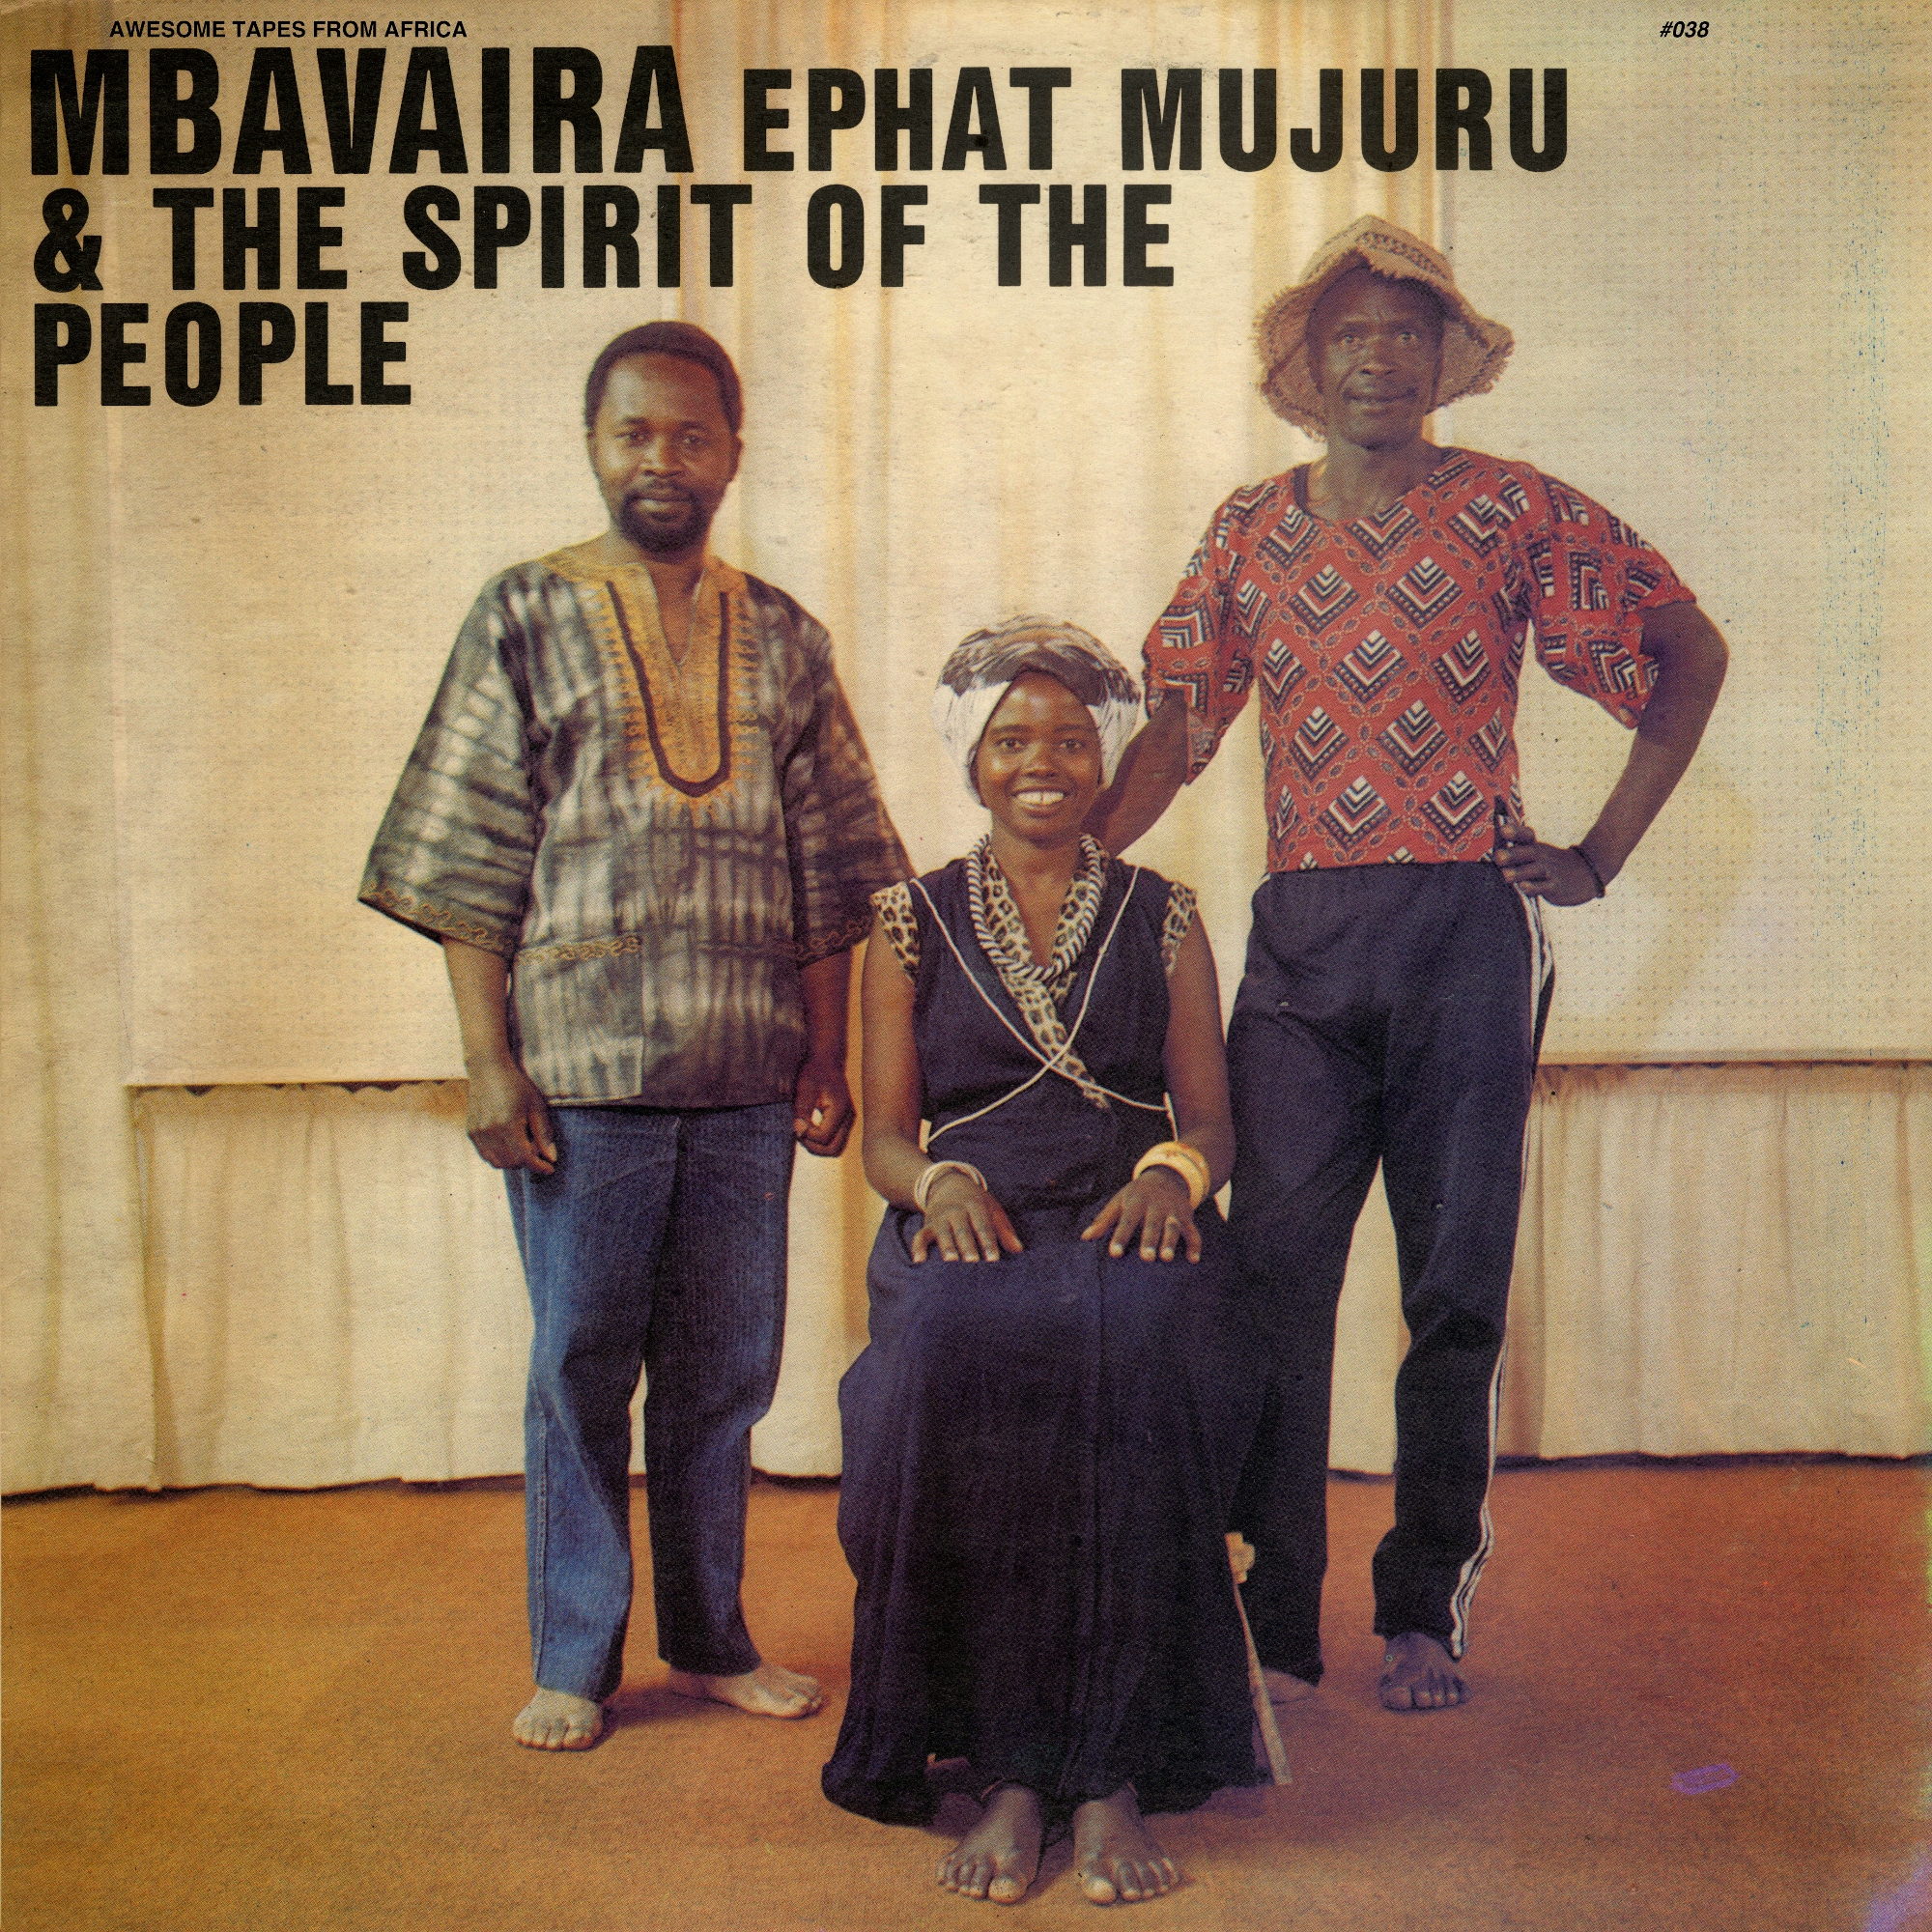 Album artwork for Album artwork for Mbavaira by Ephat Mujuru and The Spirit of the People by Mbavaira - Ephat Mujuru and The Spirit of the People